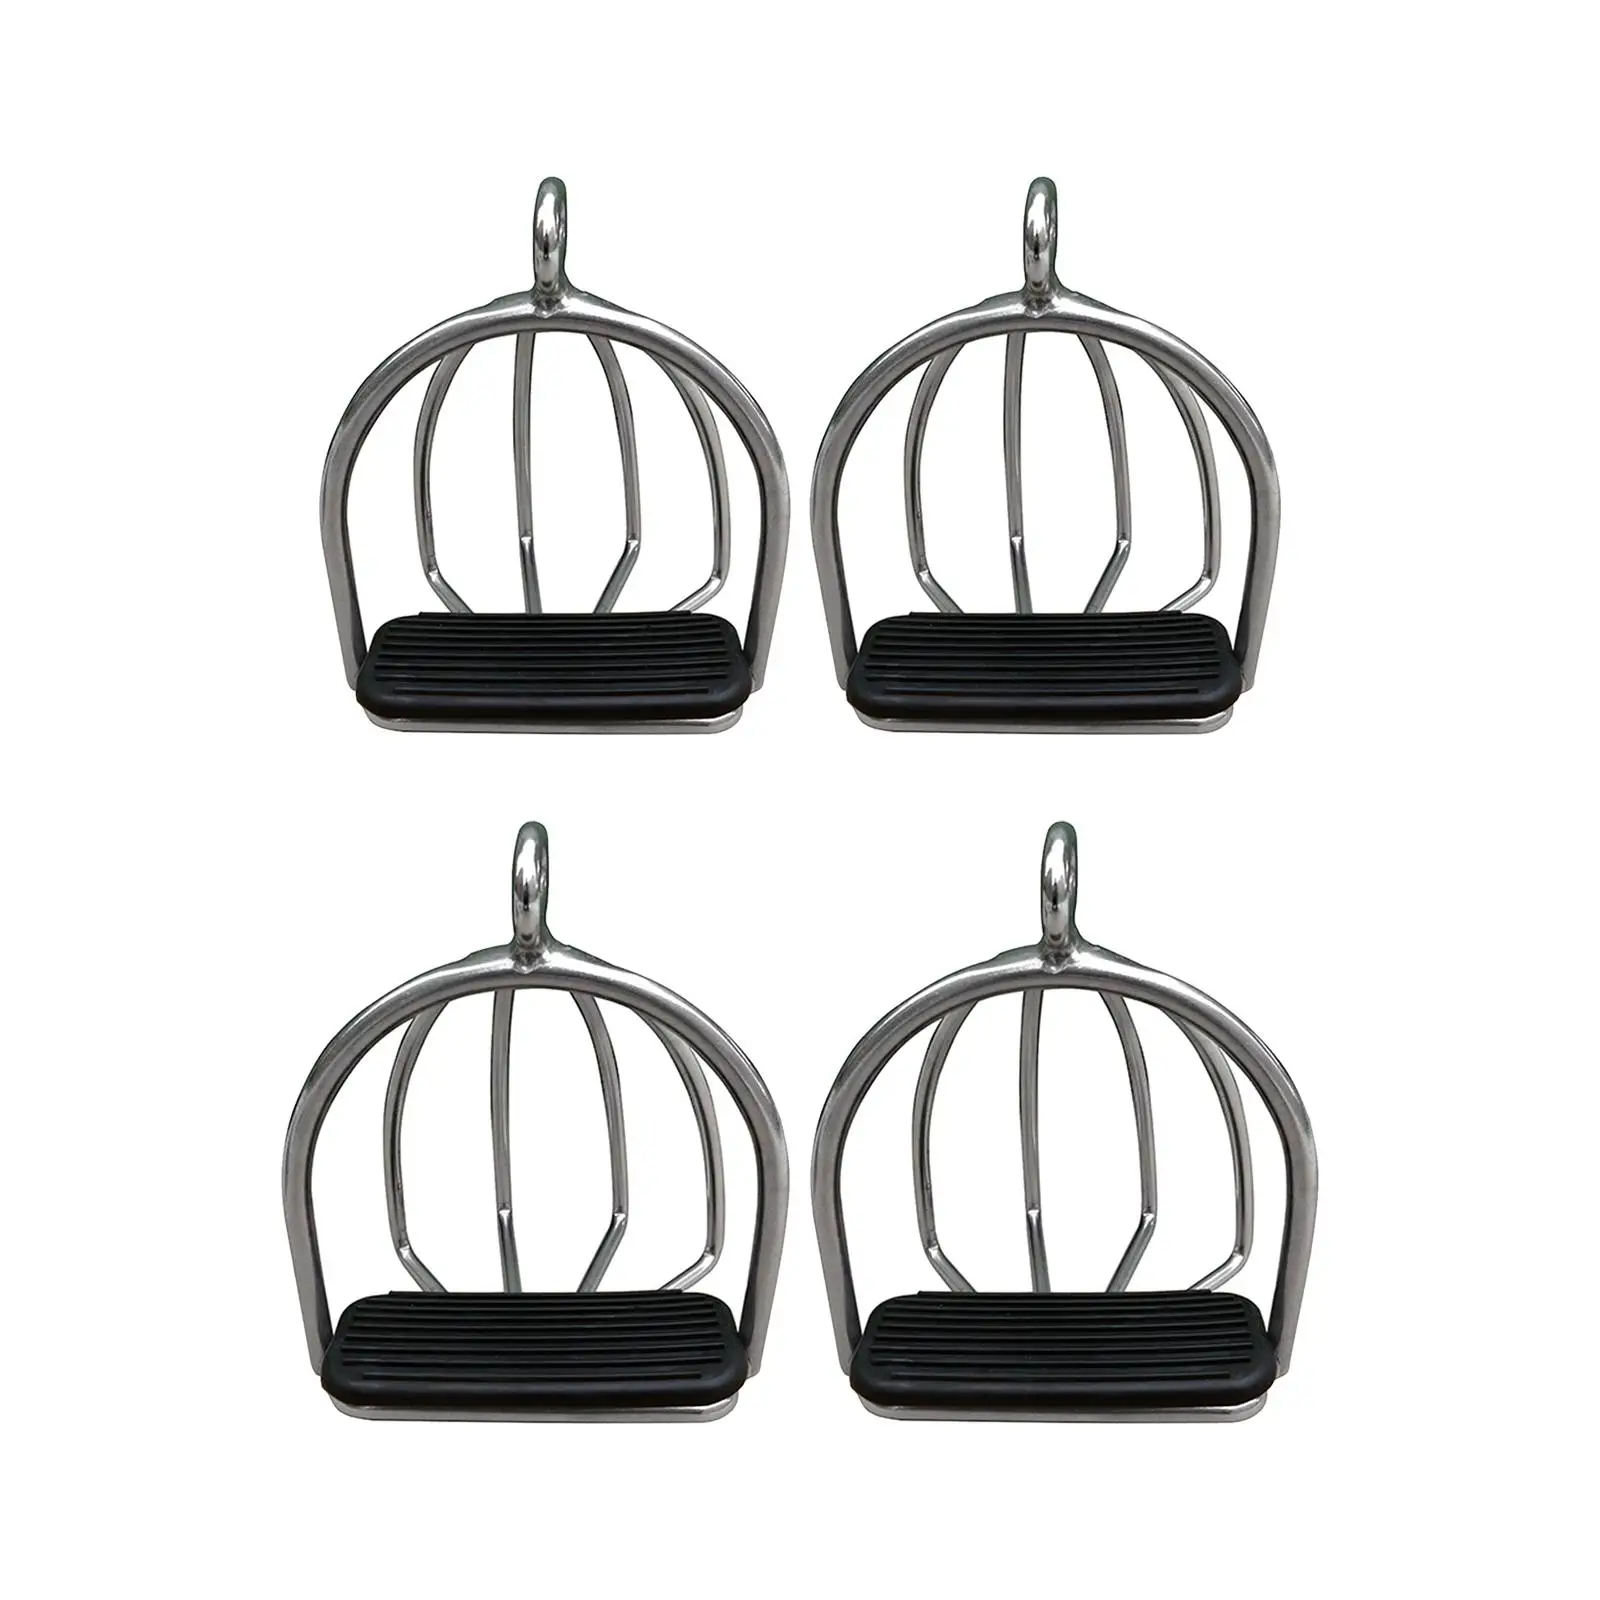 2x Cage Horse Riding Stirrups Rubber Pad Stainless Steel Tool Equestrian Sports for Safety Horse Riding Outdoor Accessories Kids